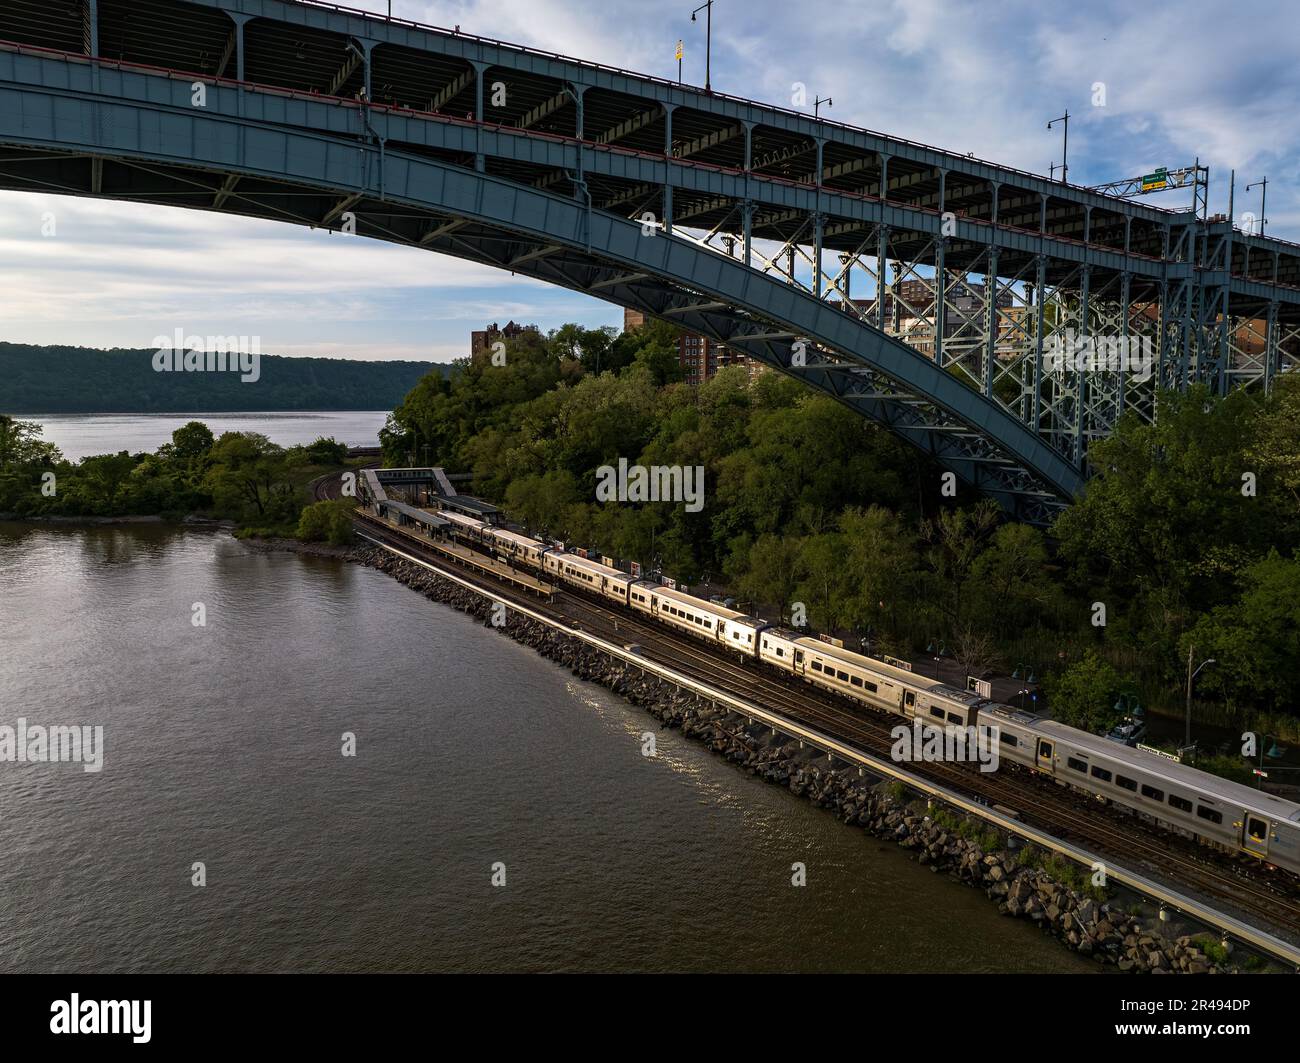 The Henry Hudson Bridge with a train passing under it. New York, USA. Stock Photo